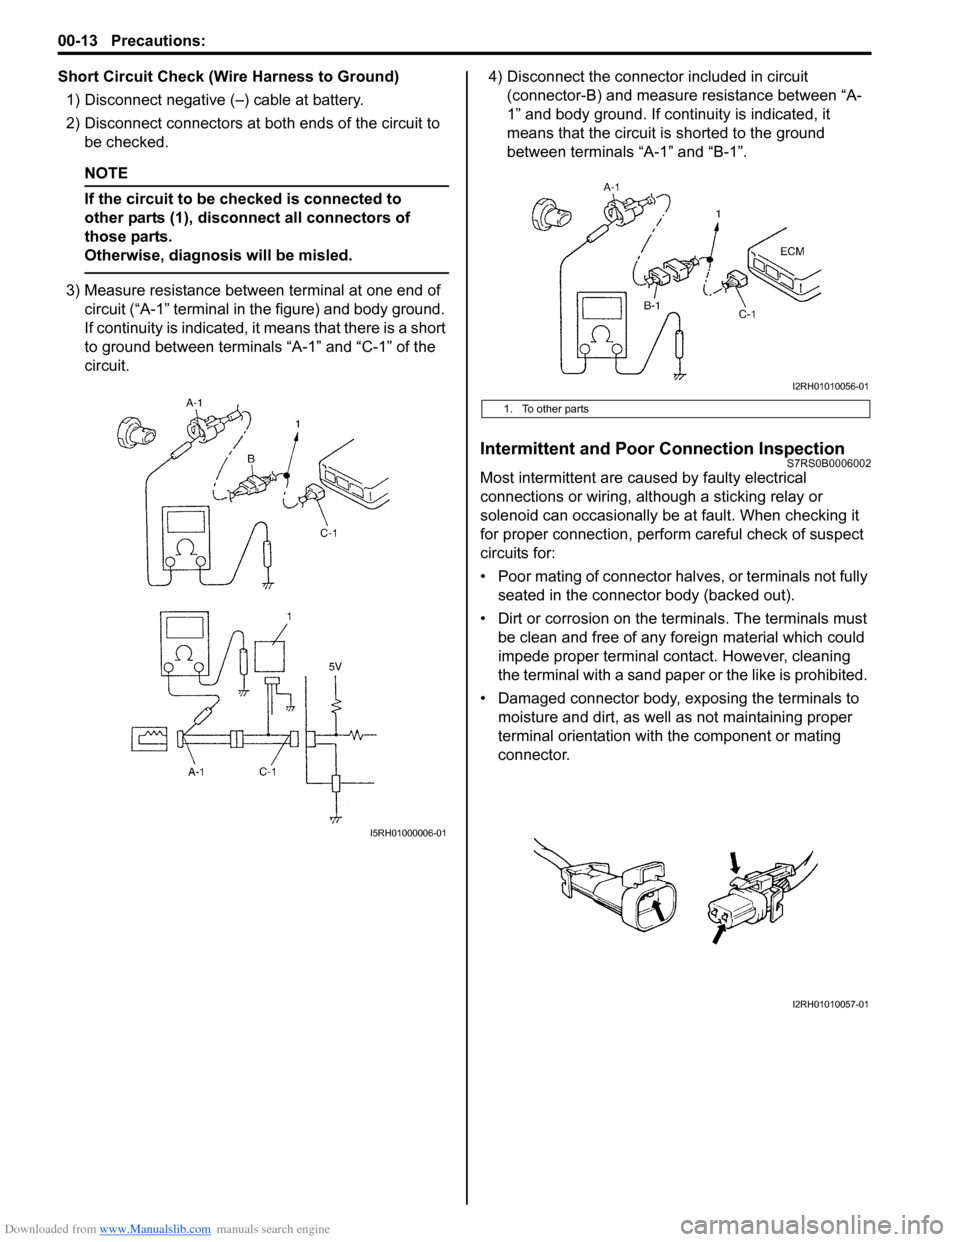 SUZUKI SWIFT 2007 2.G Service Workshop Manual Downloaded from www.Manualslib.com manuals search engine 00-13 Precautions: 
Short Circuit Check (Wire Harness to Ground)1) Disconnect negative (–) cable at battery.
2) Disconnect connectors at bot 